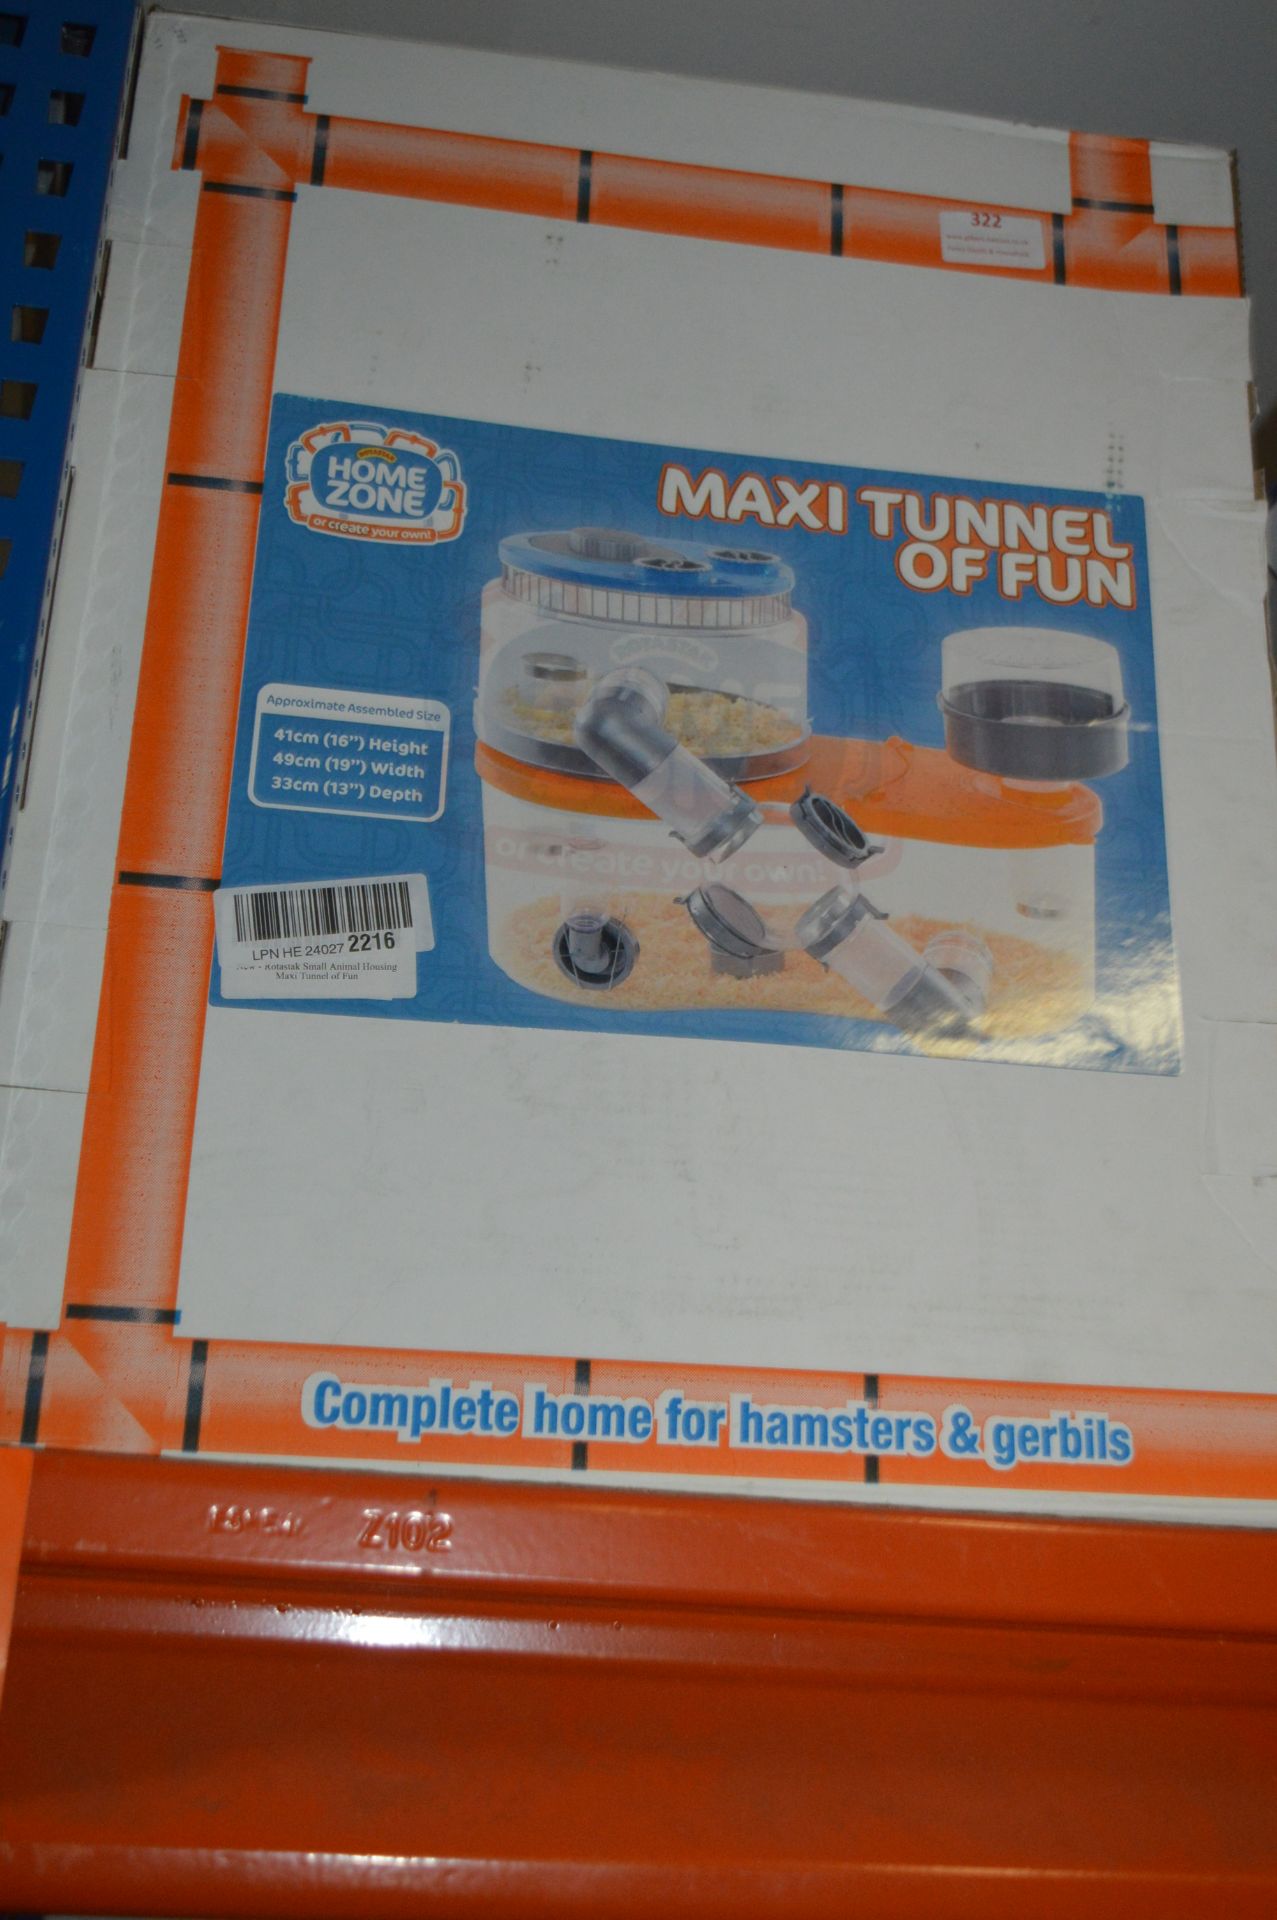 *Homezone Maxi Tunnel of Fun Home for Hamsters and